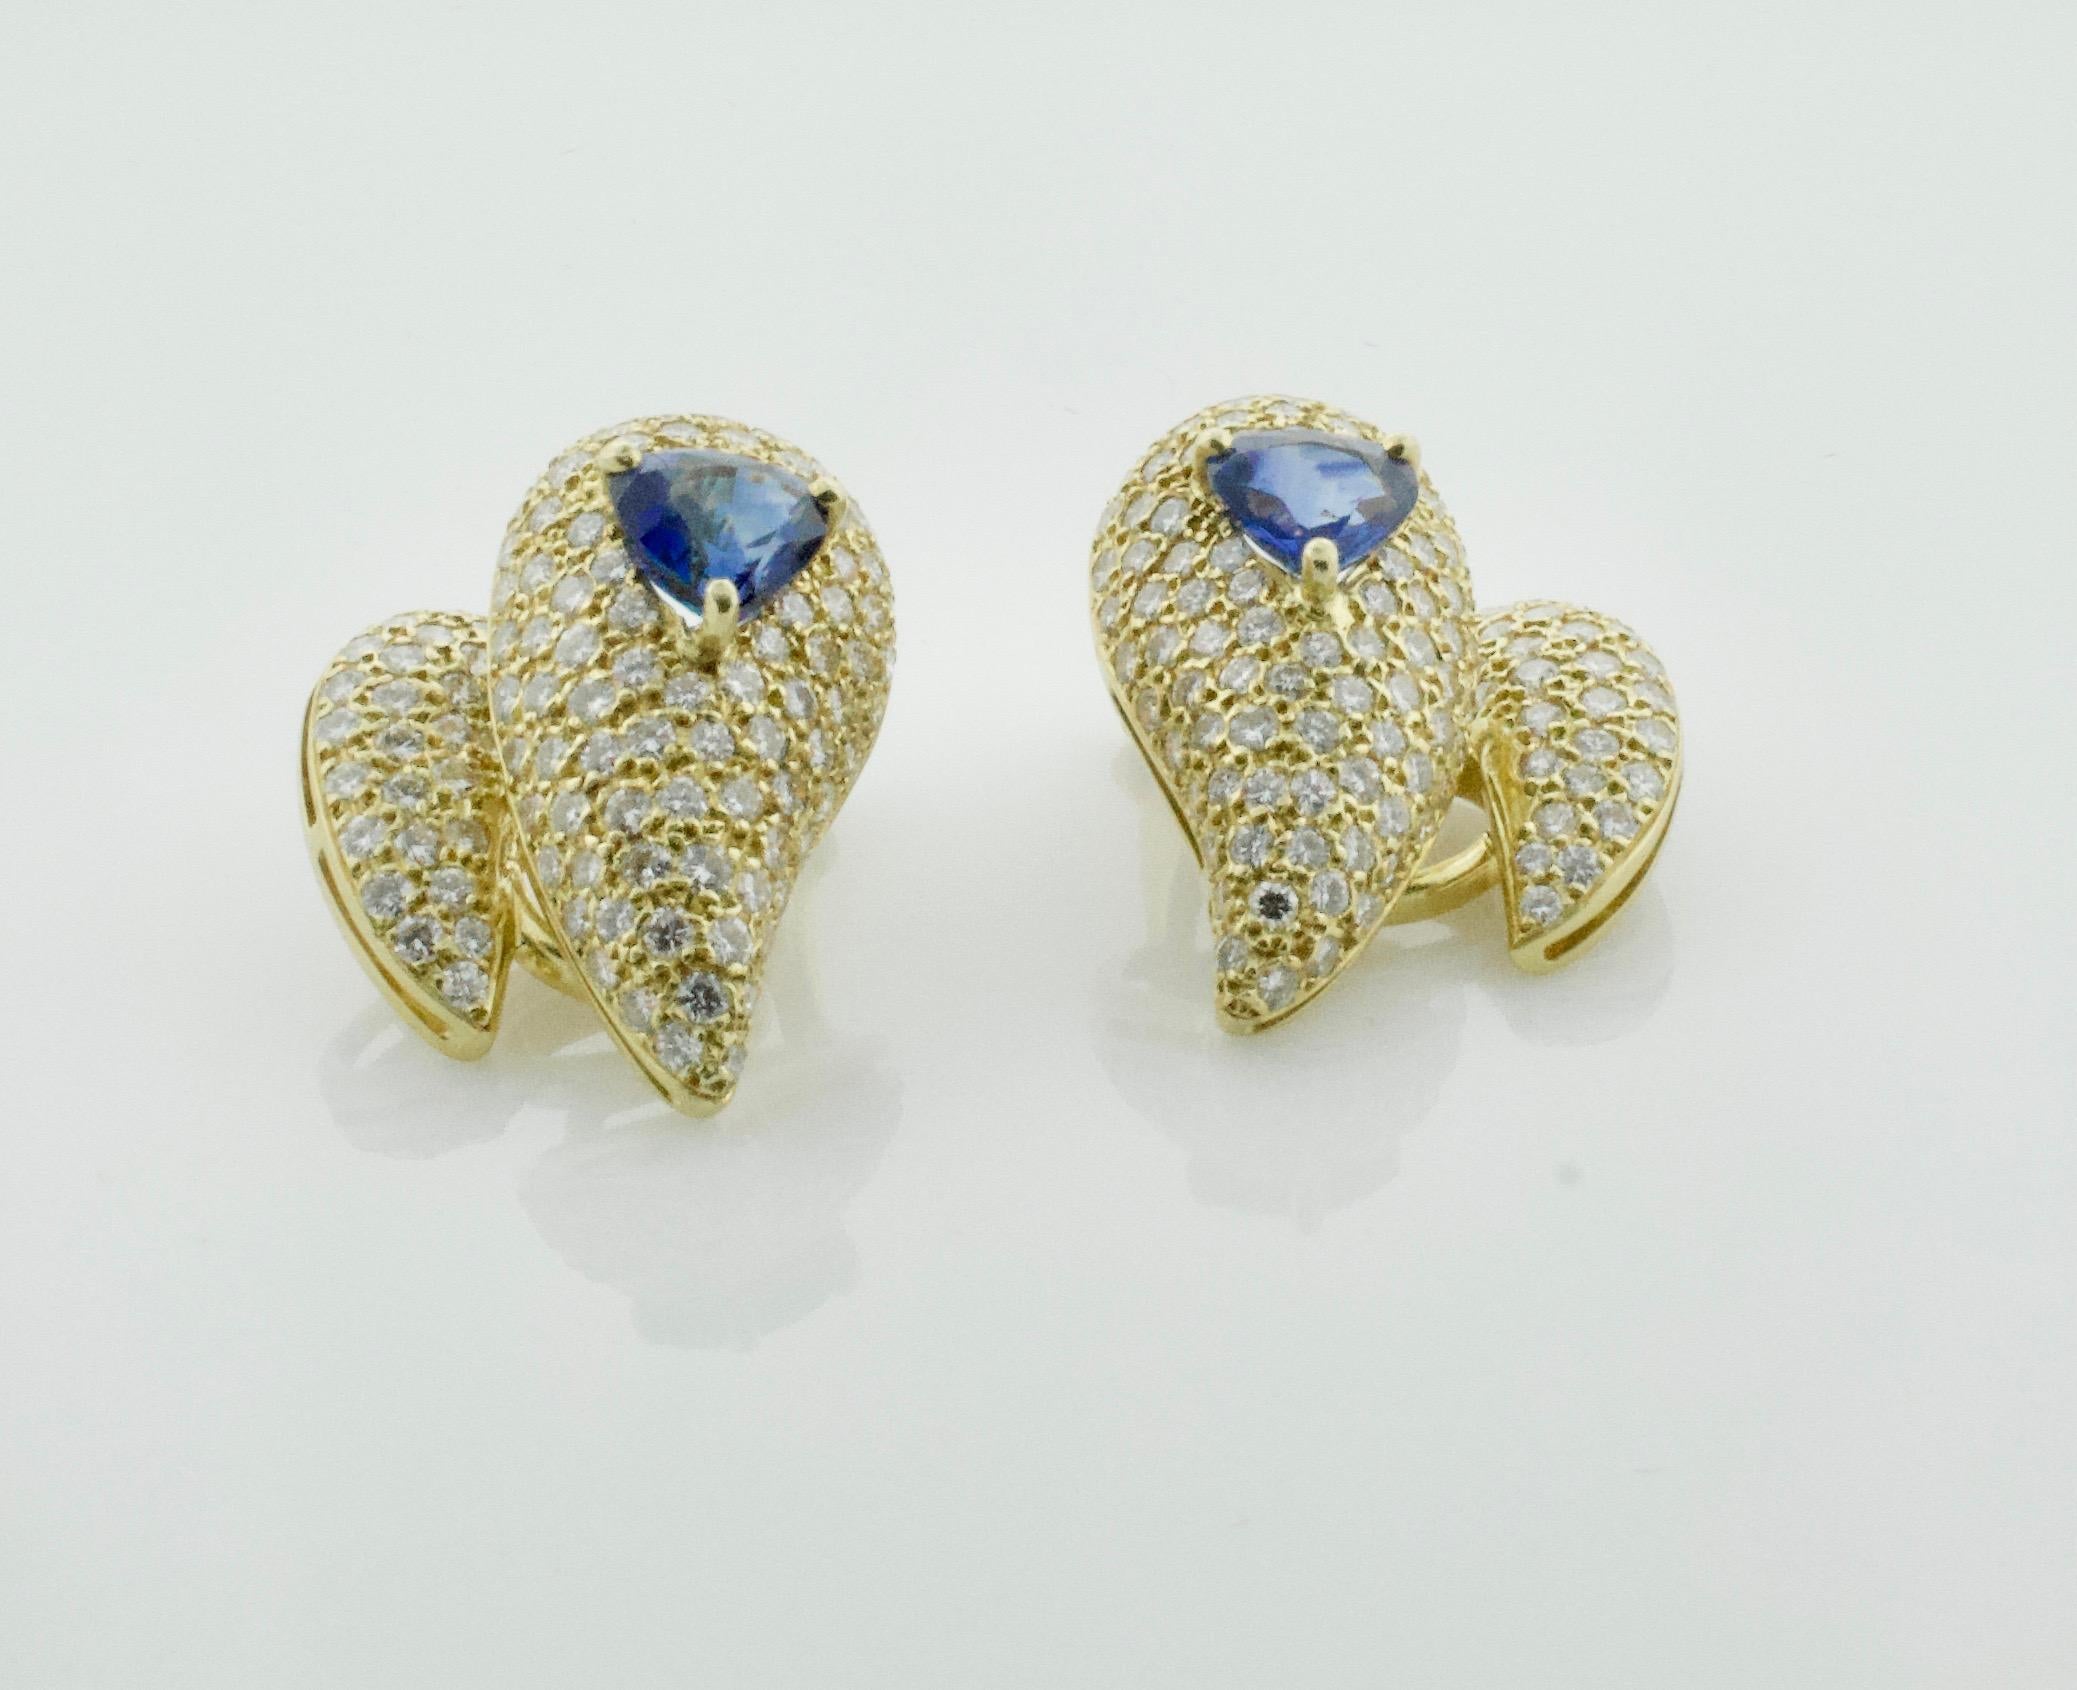 Modern Sabbadini Unique Sapphire and Diamond Earrings in 18k Sap = 3.00 Dia = 7.00 cts. For Sale